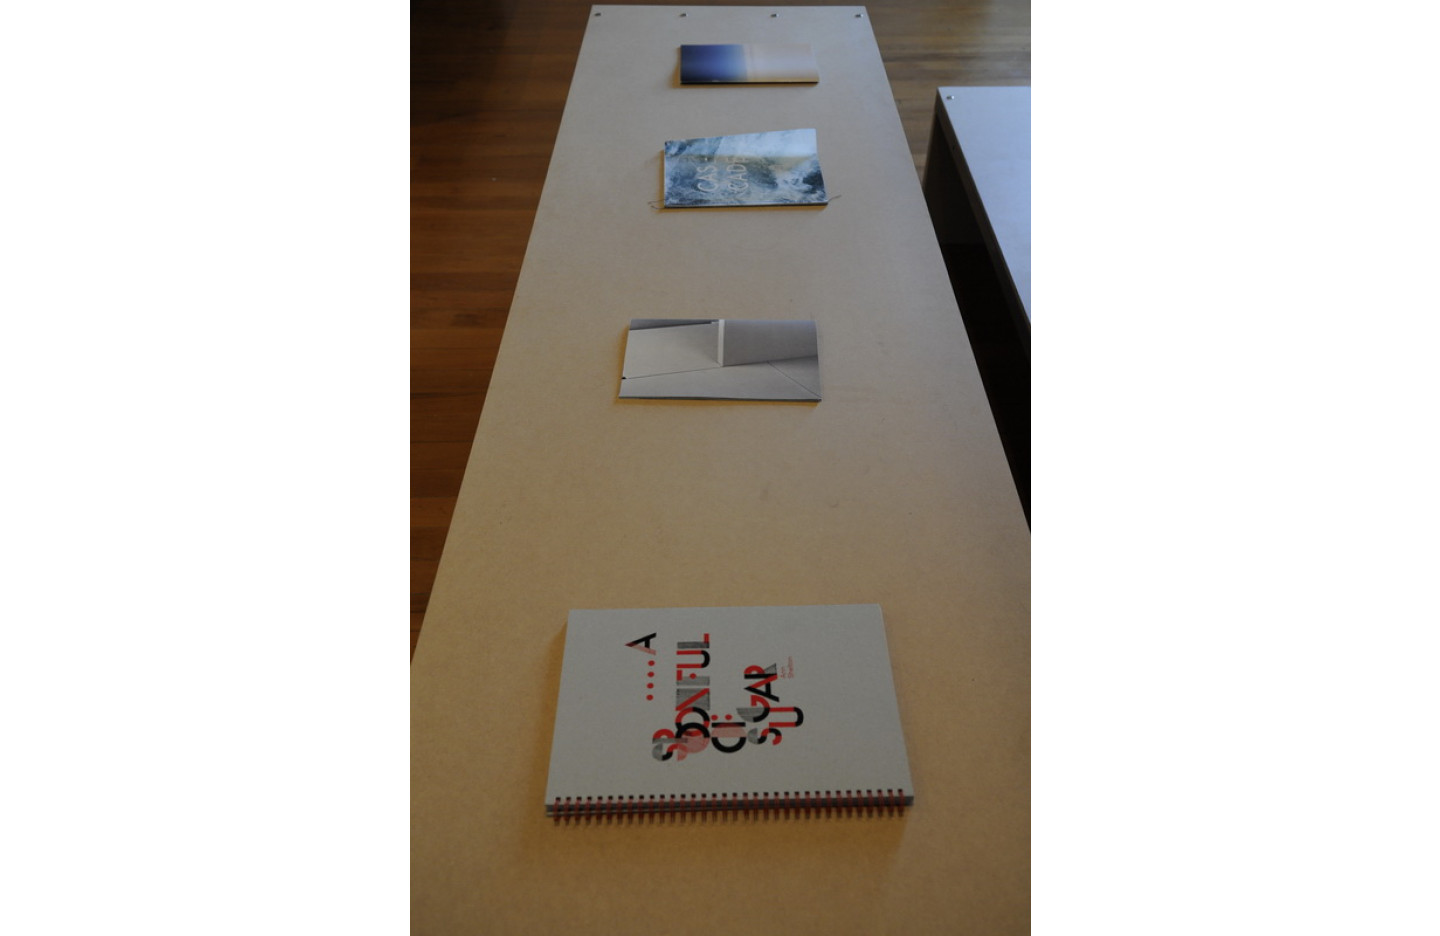 Installation image of "Open Book", Ramp Gallery Apr 2016. Including: Ann Shelton, Shelley Jacobson,